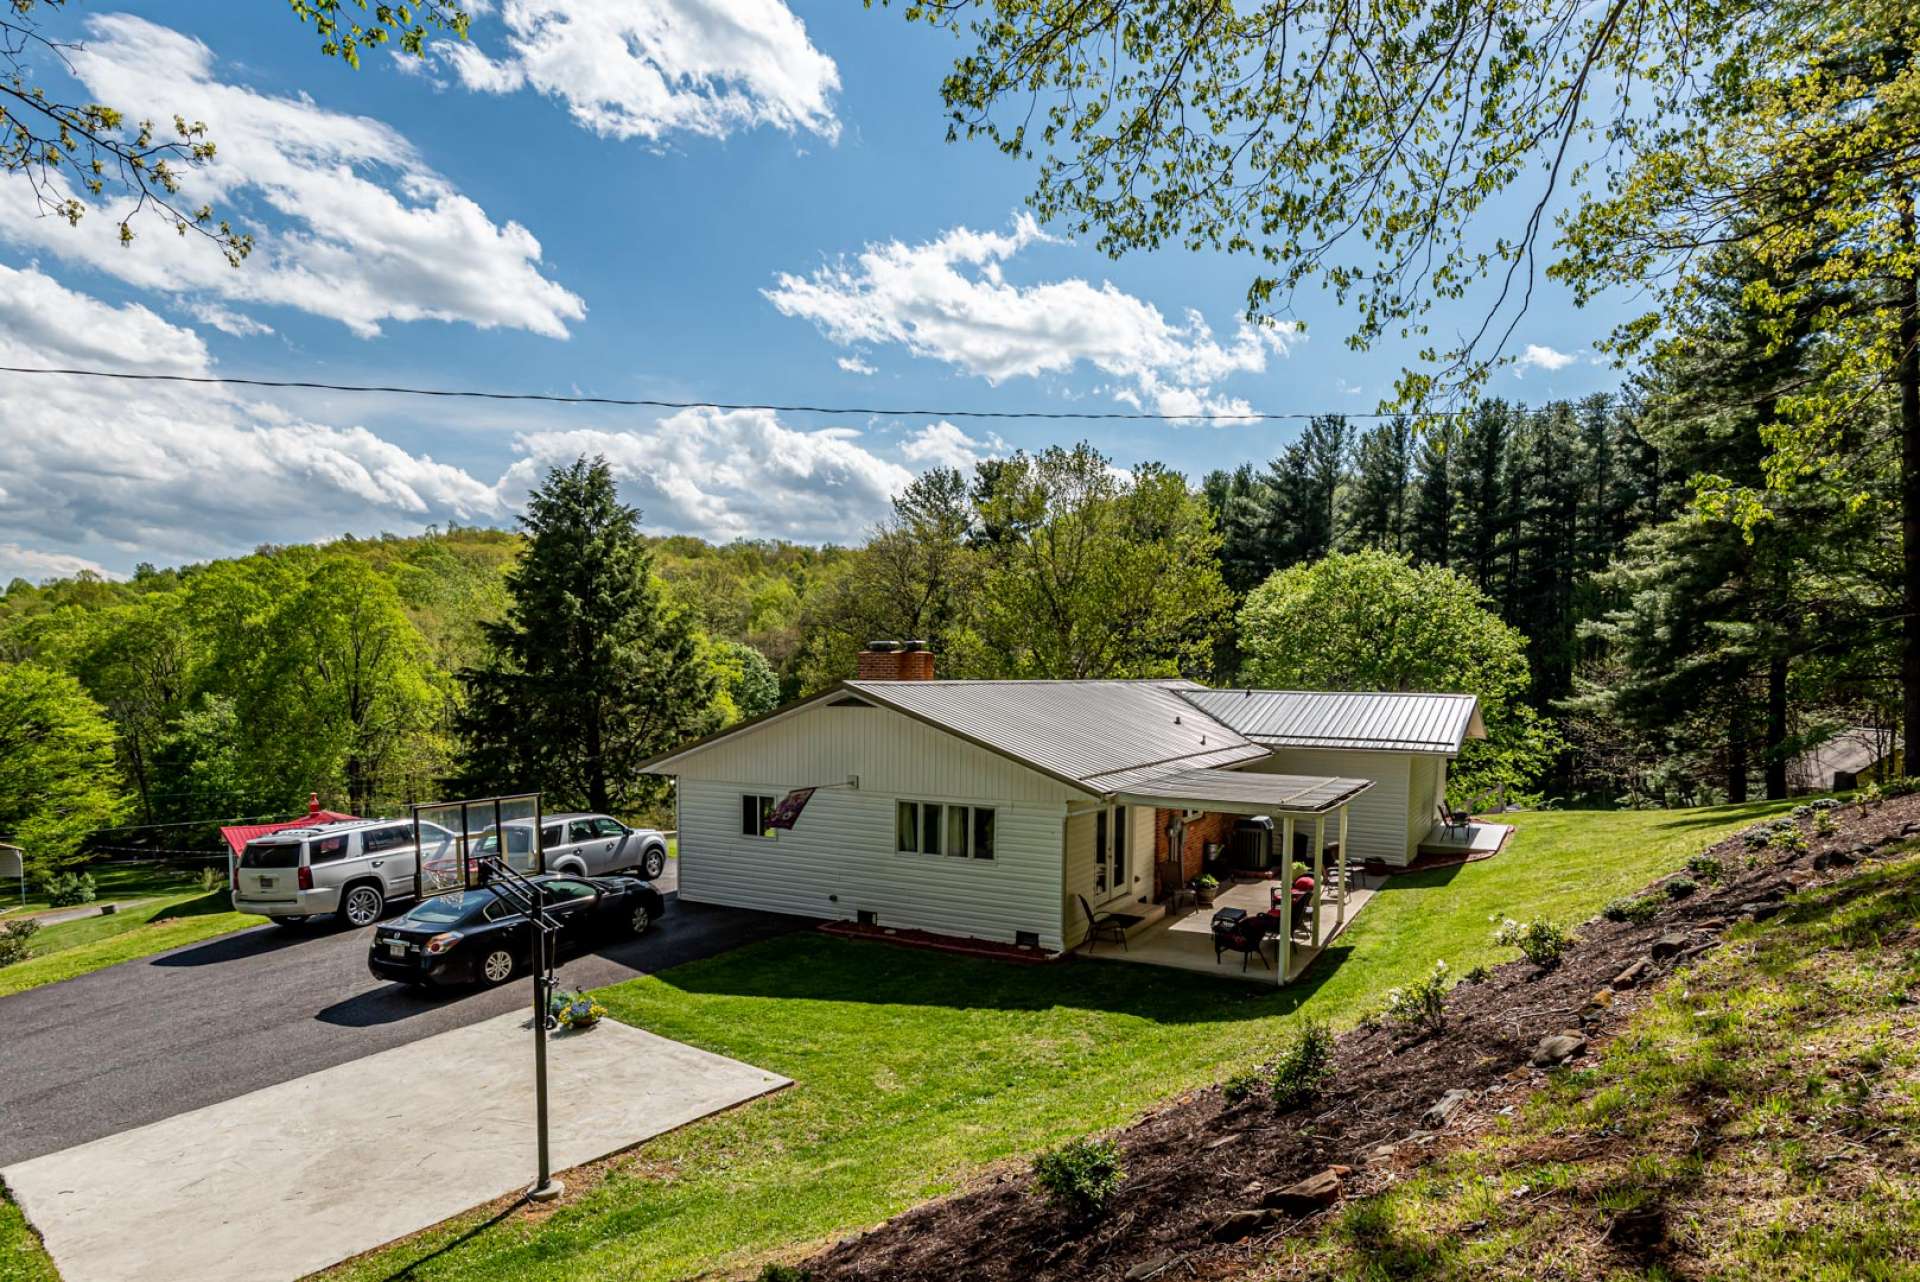 This sweet mountain home is an ideal option for your primary home, cool mountain retreat, or investment property.  The location is convenient to downtown West Jefferson, Boone, and many of the NC High Country destinations.